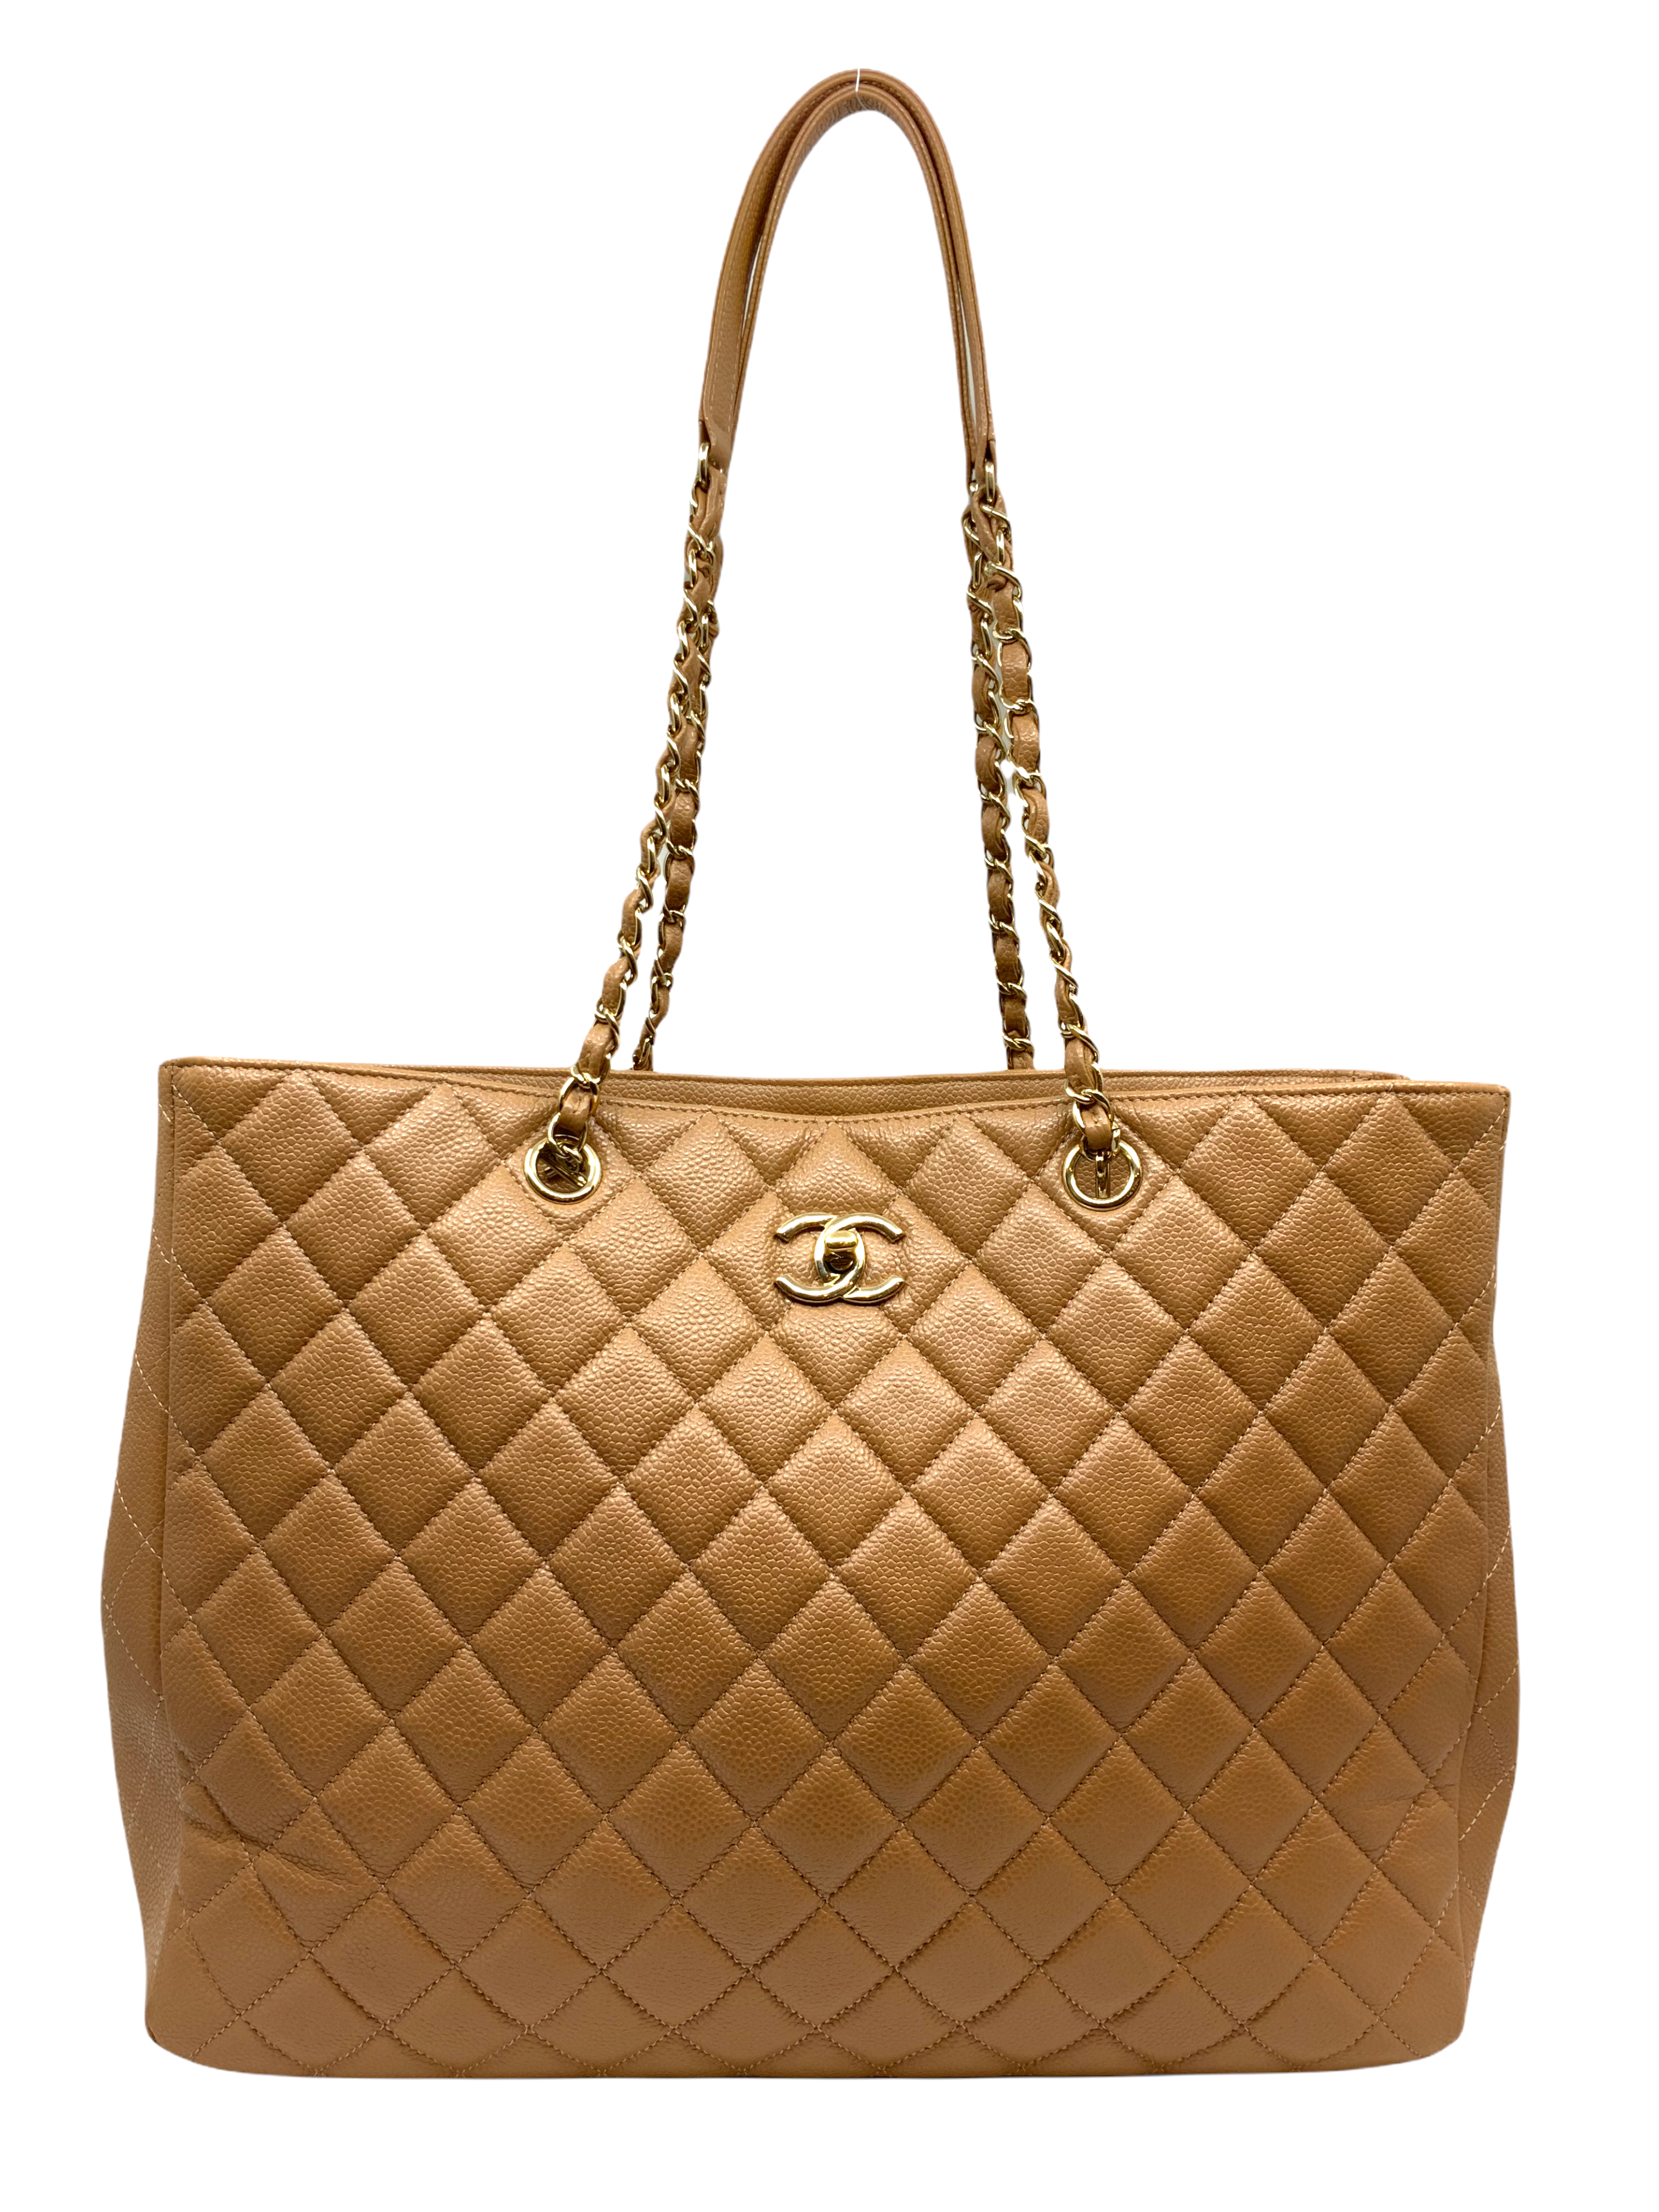 CHANEL Calfskin Stitched Large Shopping Tote Beige 1195336